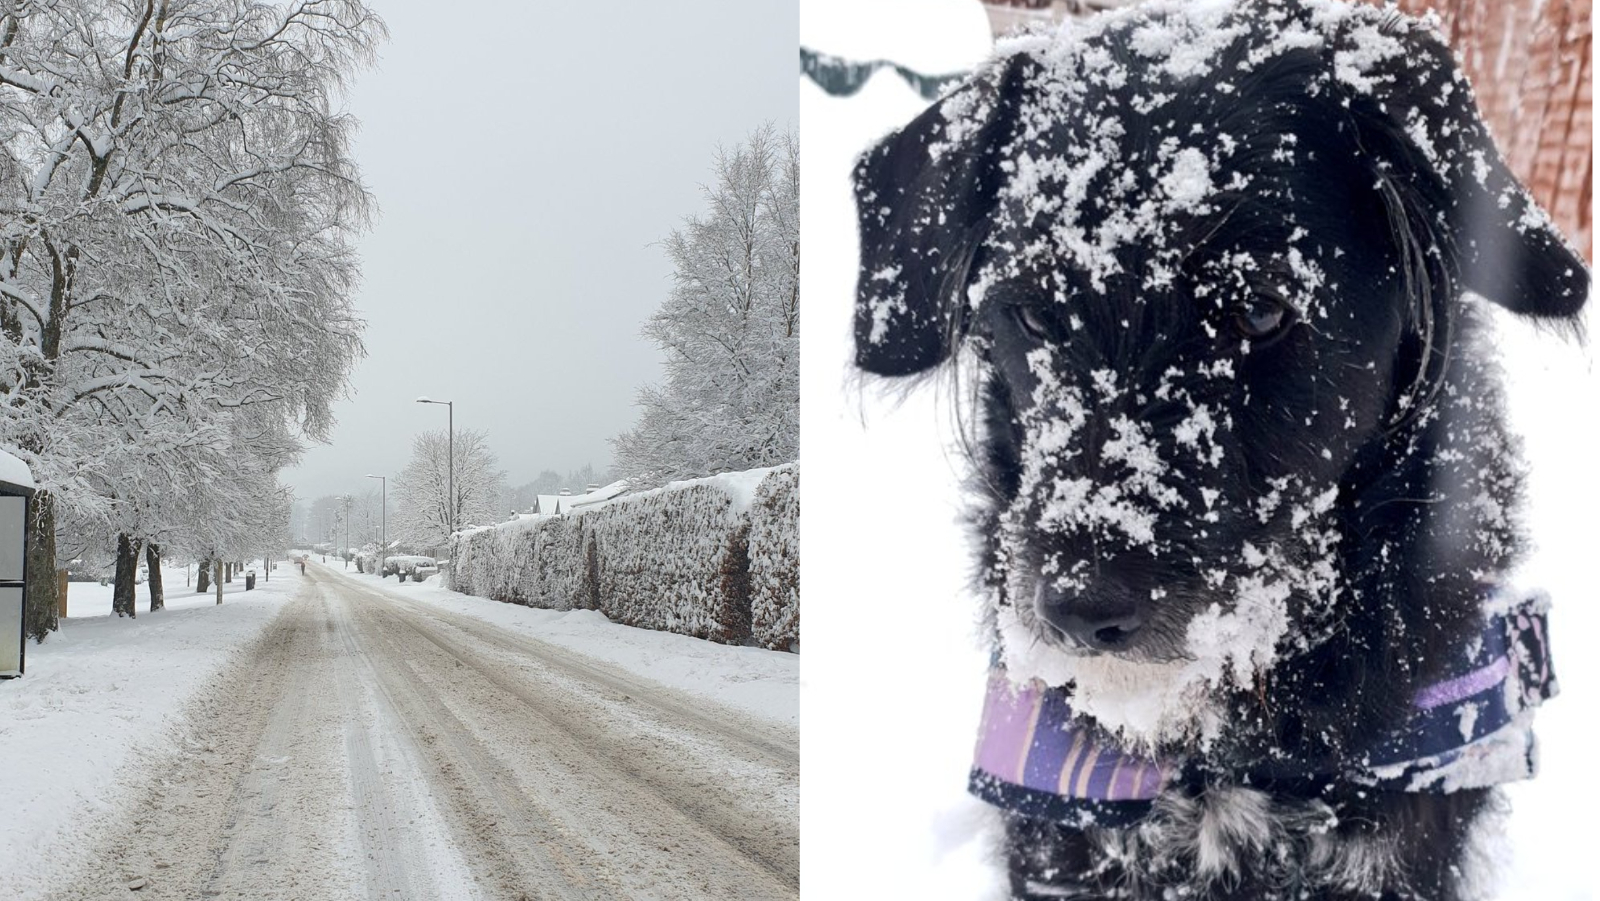 Laura Anderson shared images of her dog in the frosty conditions in Callander.